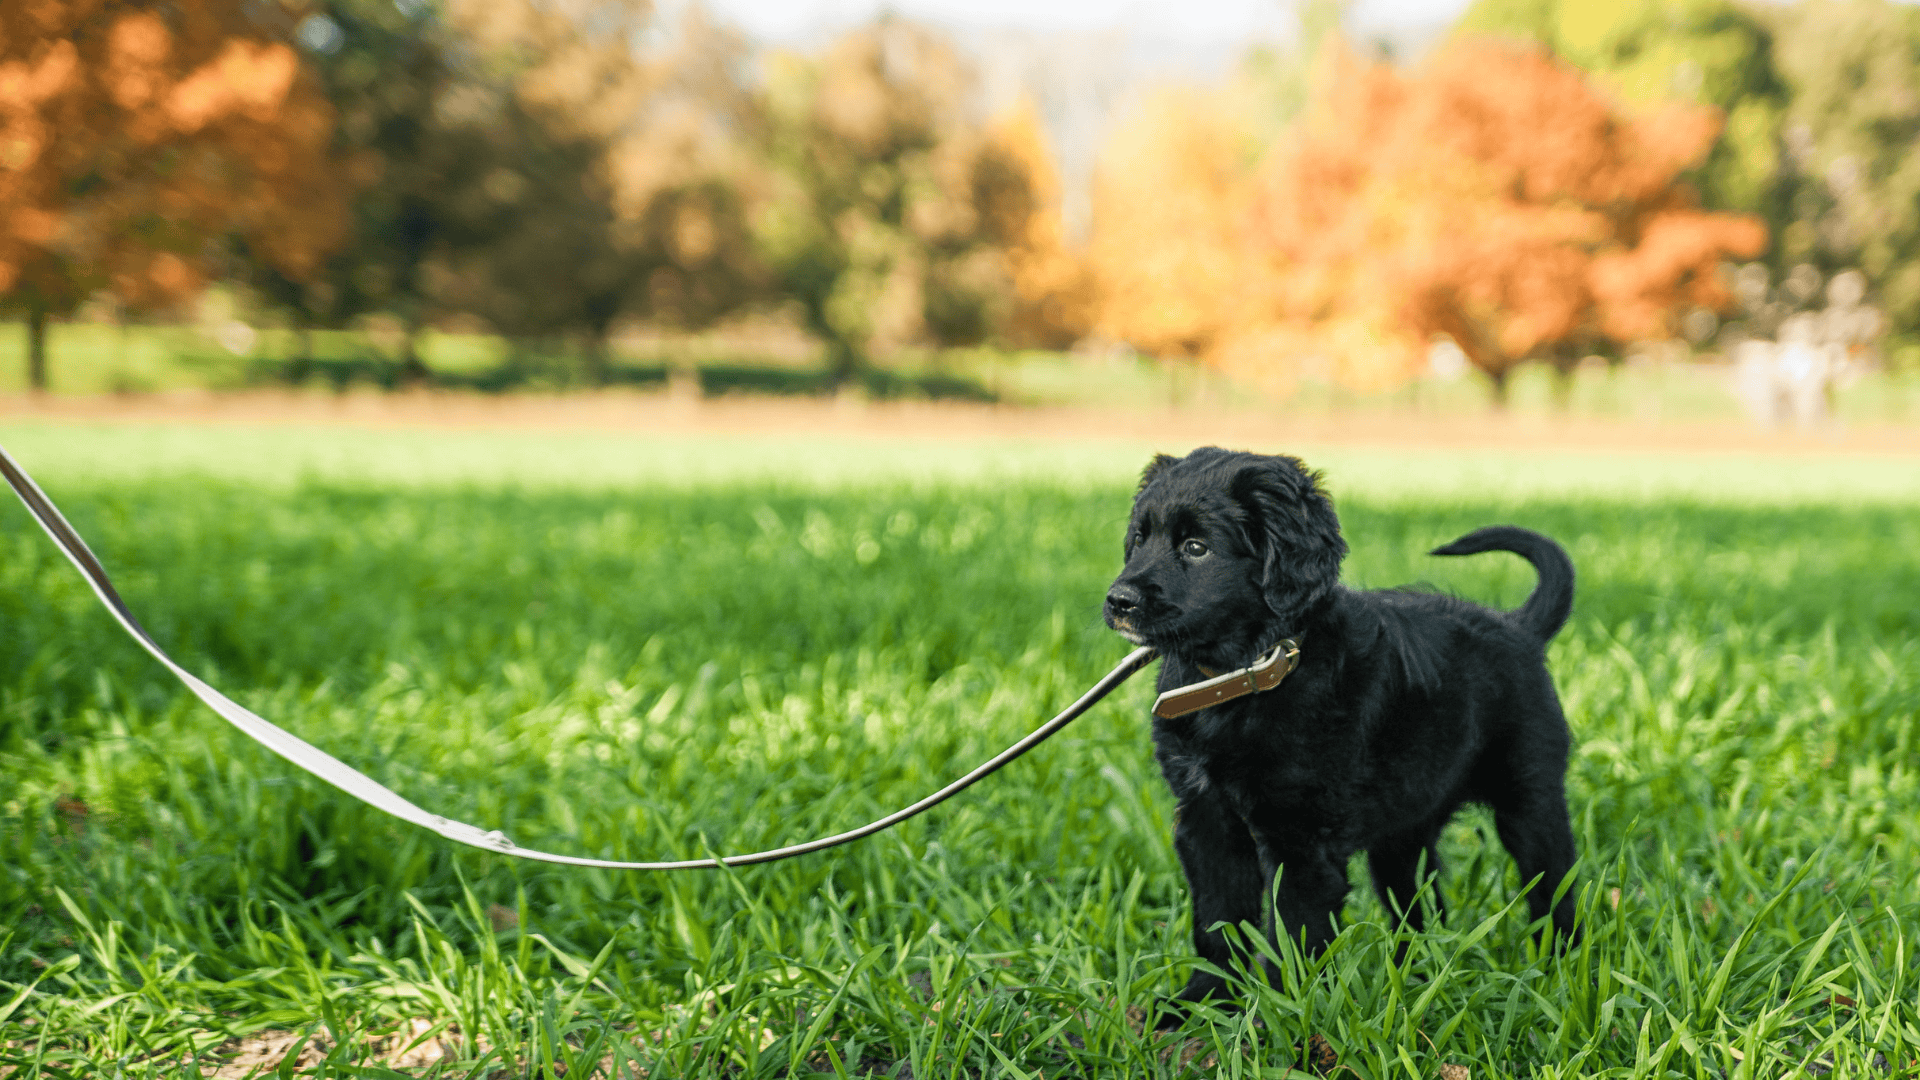 Start leash training as soon as possible. You can still leash train an older dog! It may just take more time.